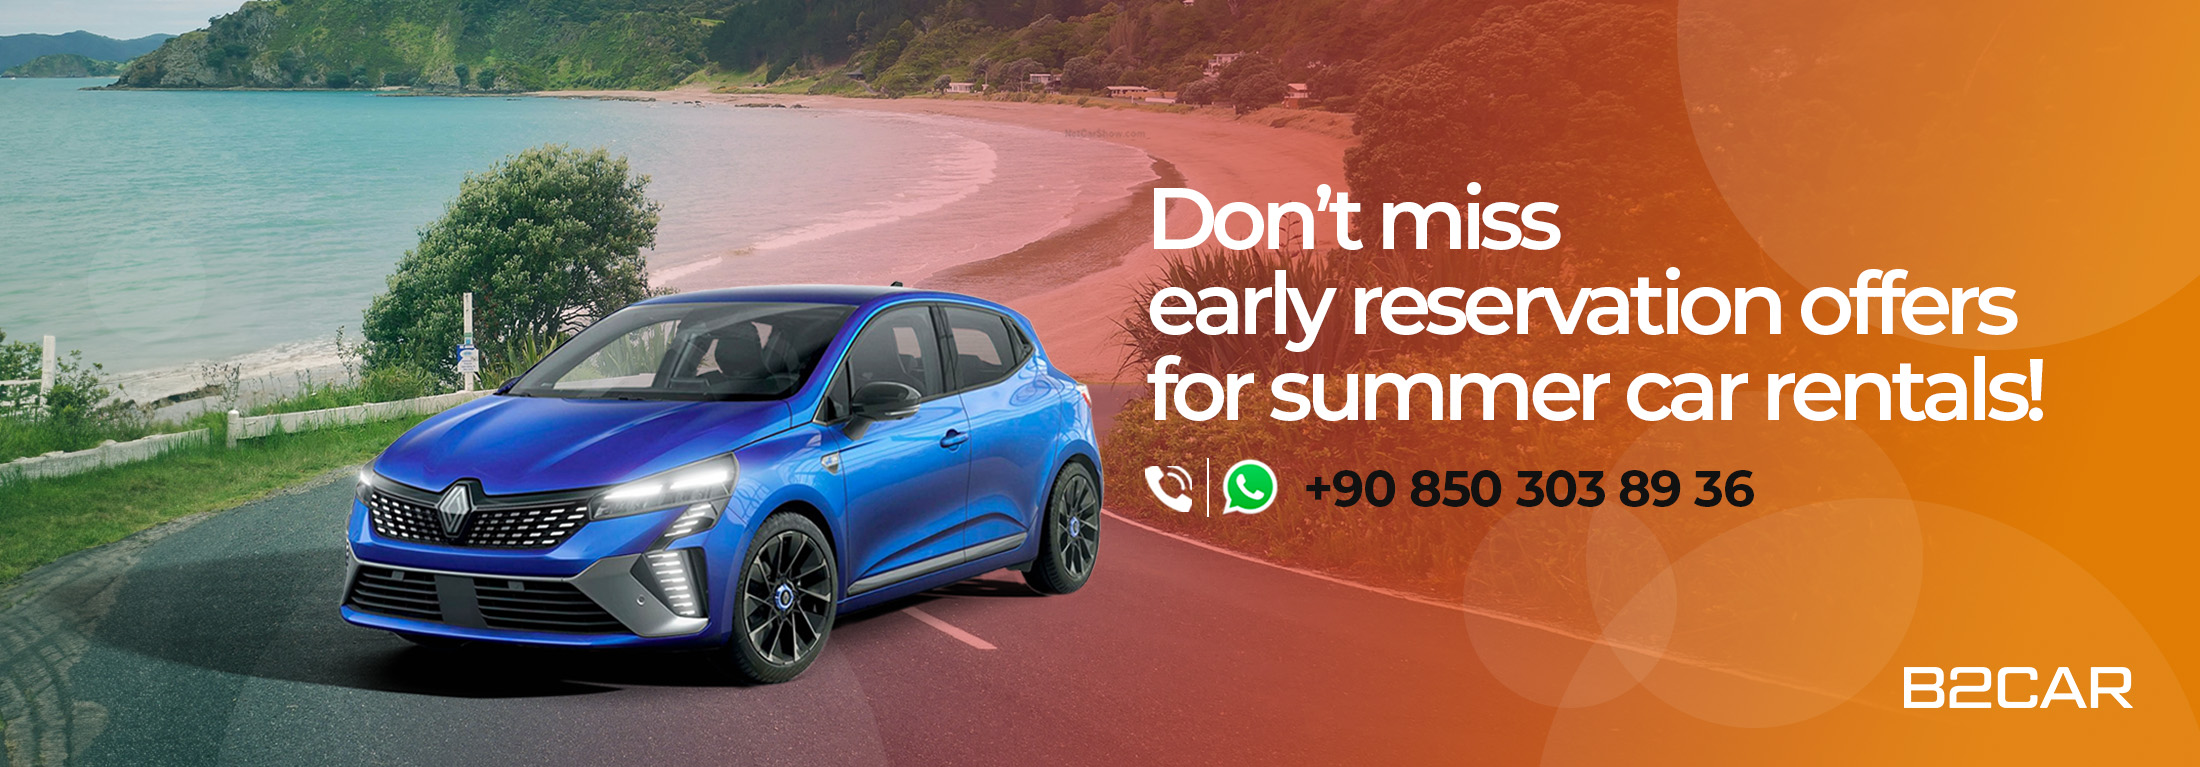 Don’t miss early reservation offers for summer car rentals! | Turkey Car Rental